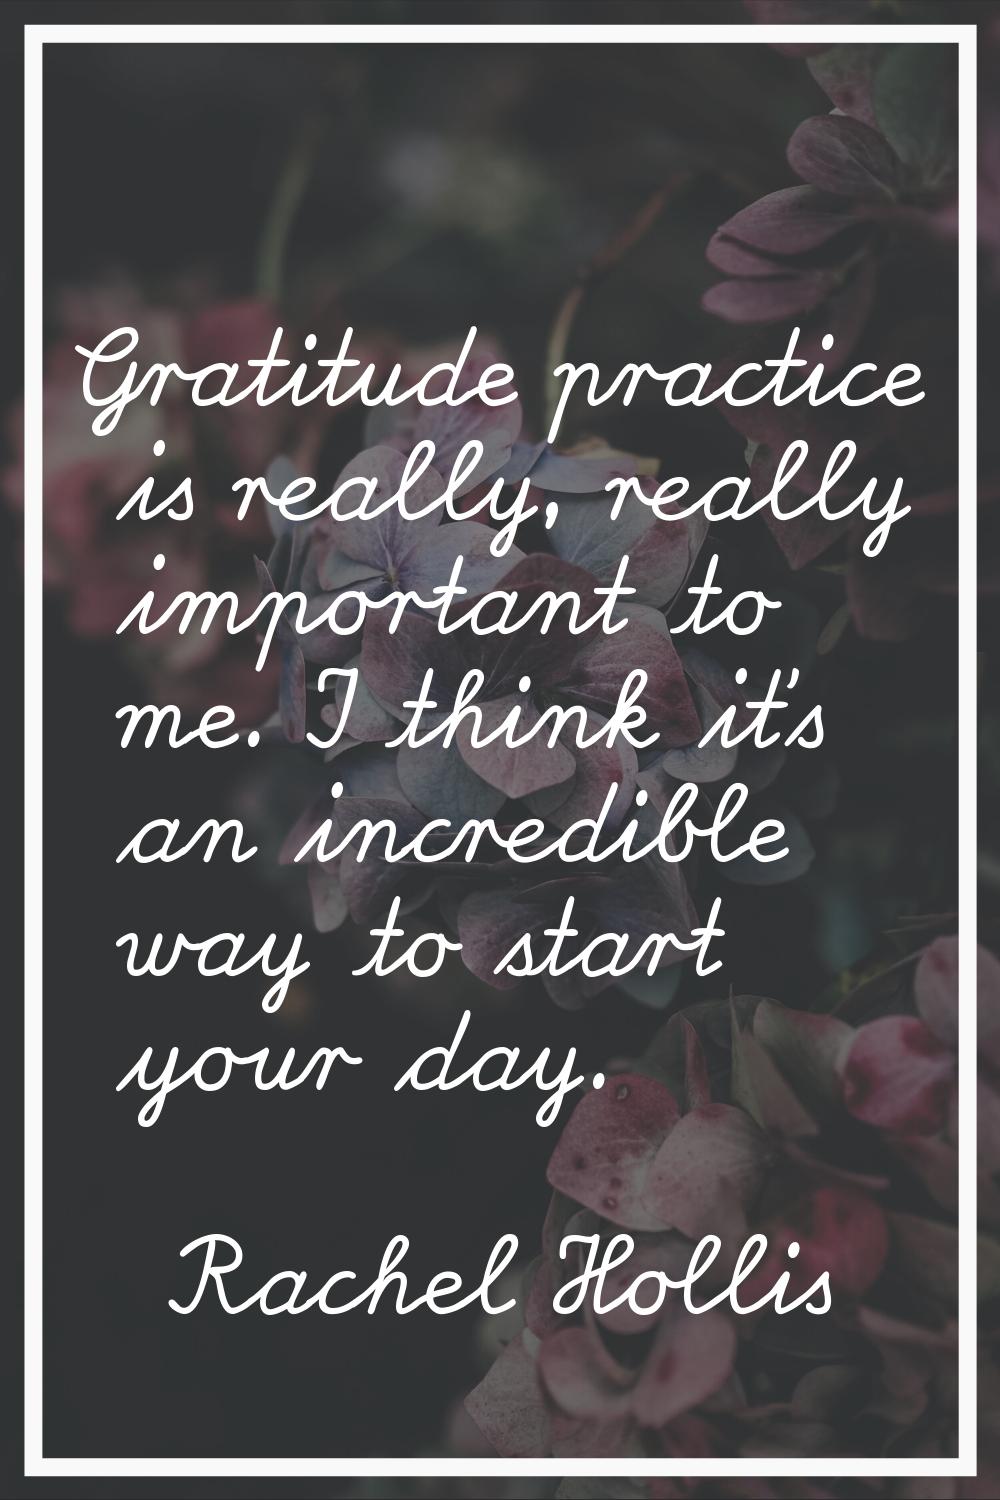 Gratitude practice is really, really important to me. I think it's an incredible way to start your 